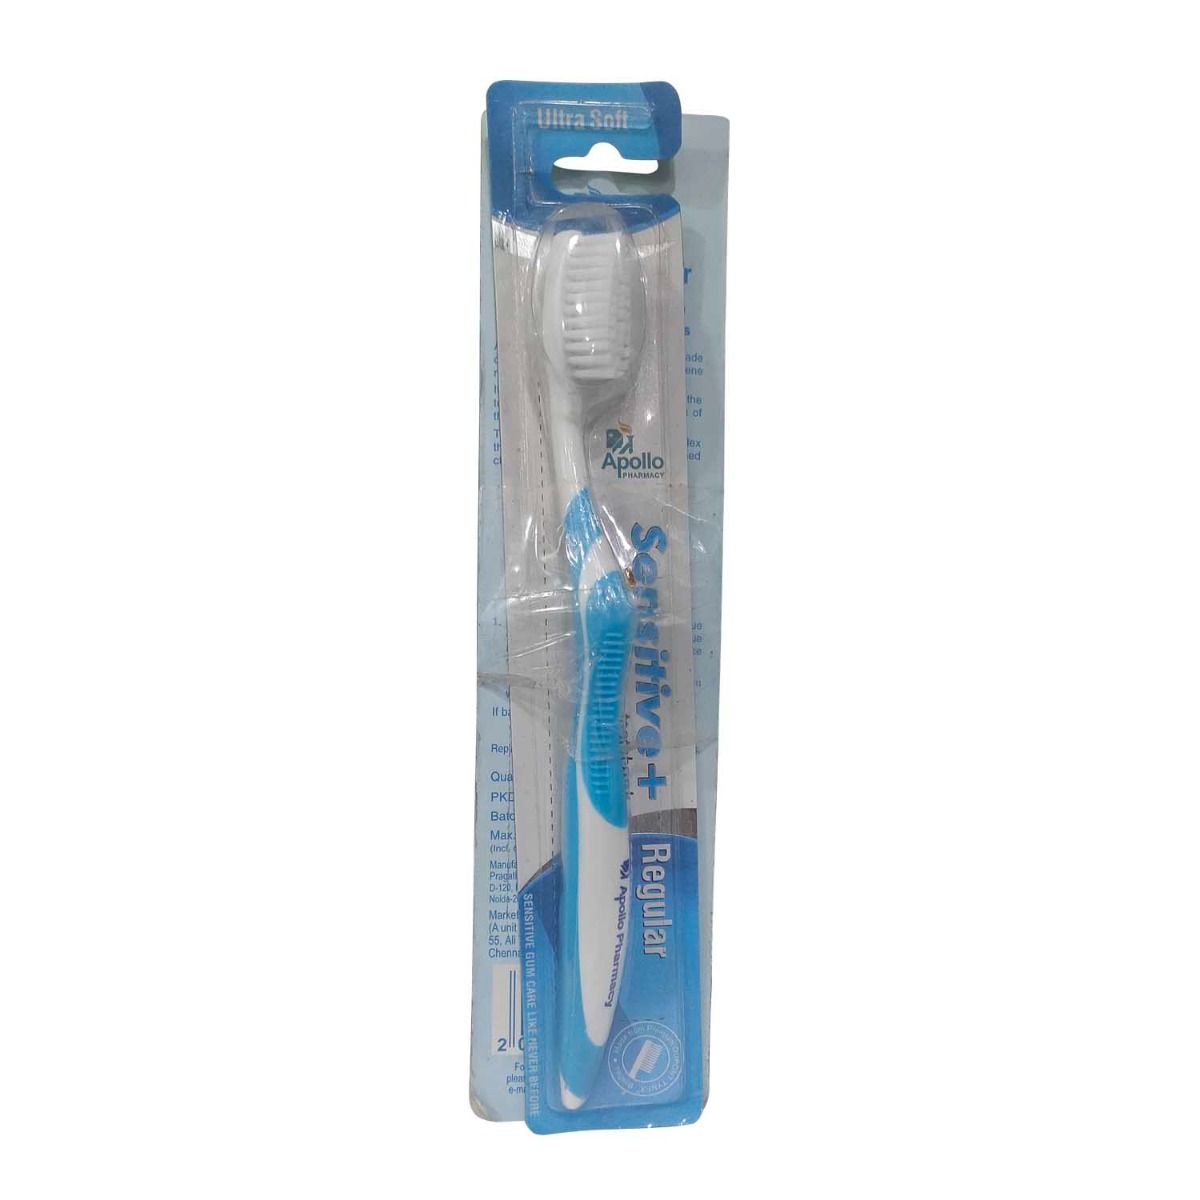 Apollo Pharmacy Value Pack Sensitive Toothbrush & Tongue Cleaner, 1 Kit, Pack of 1 